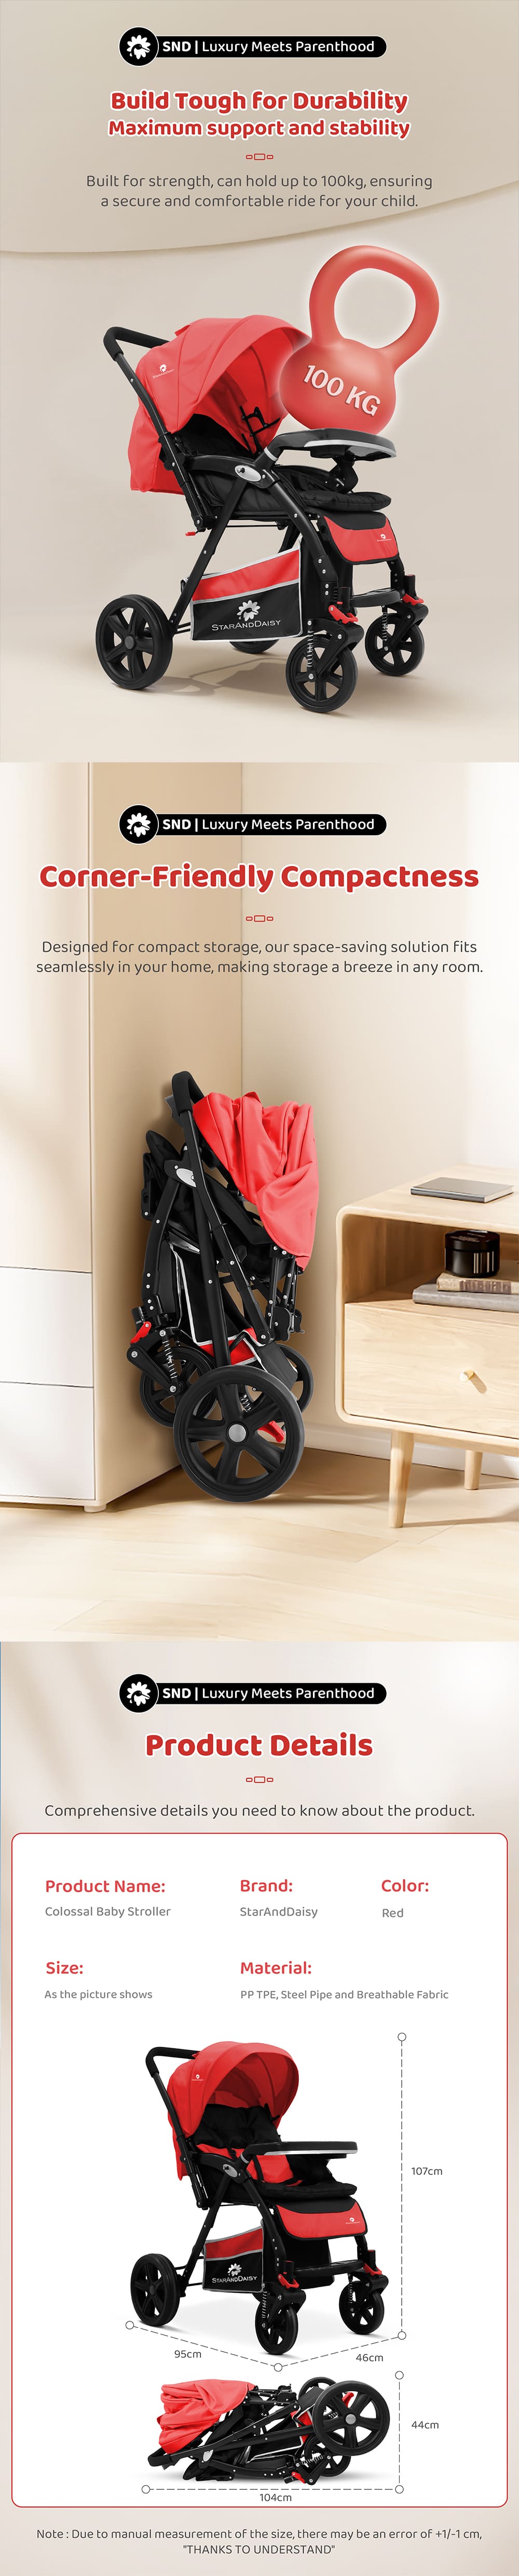 Details of Colosaal Baby Stroller